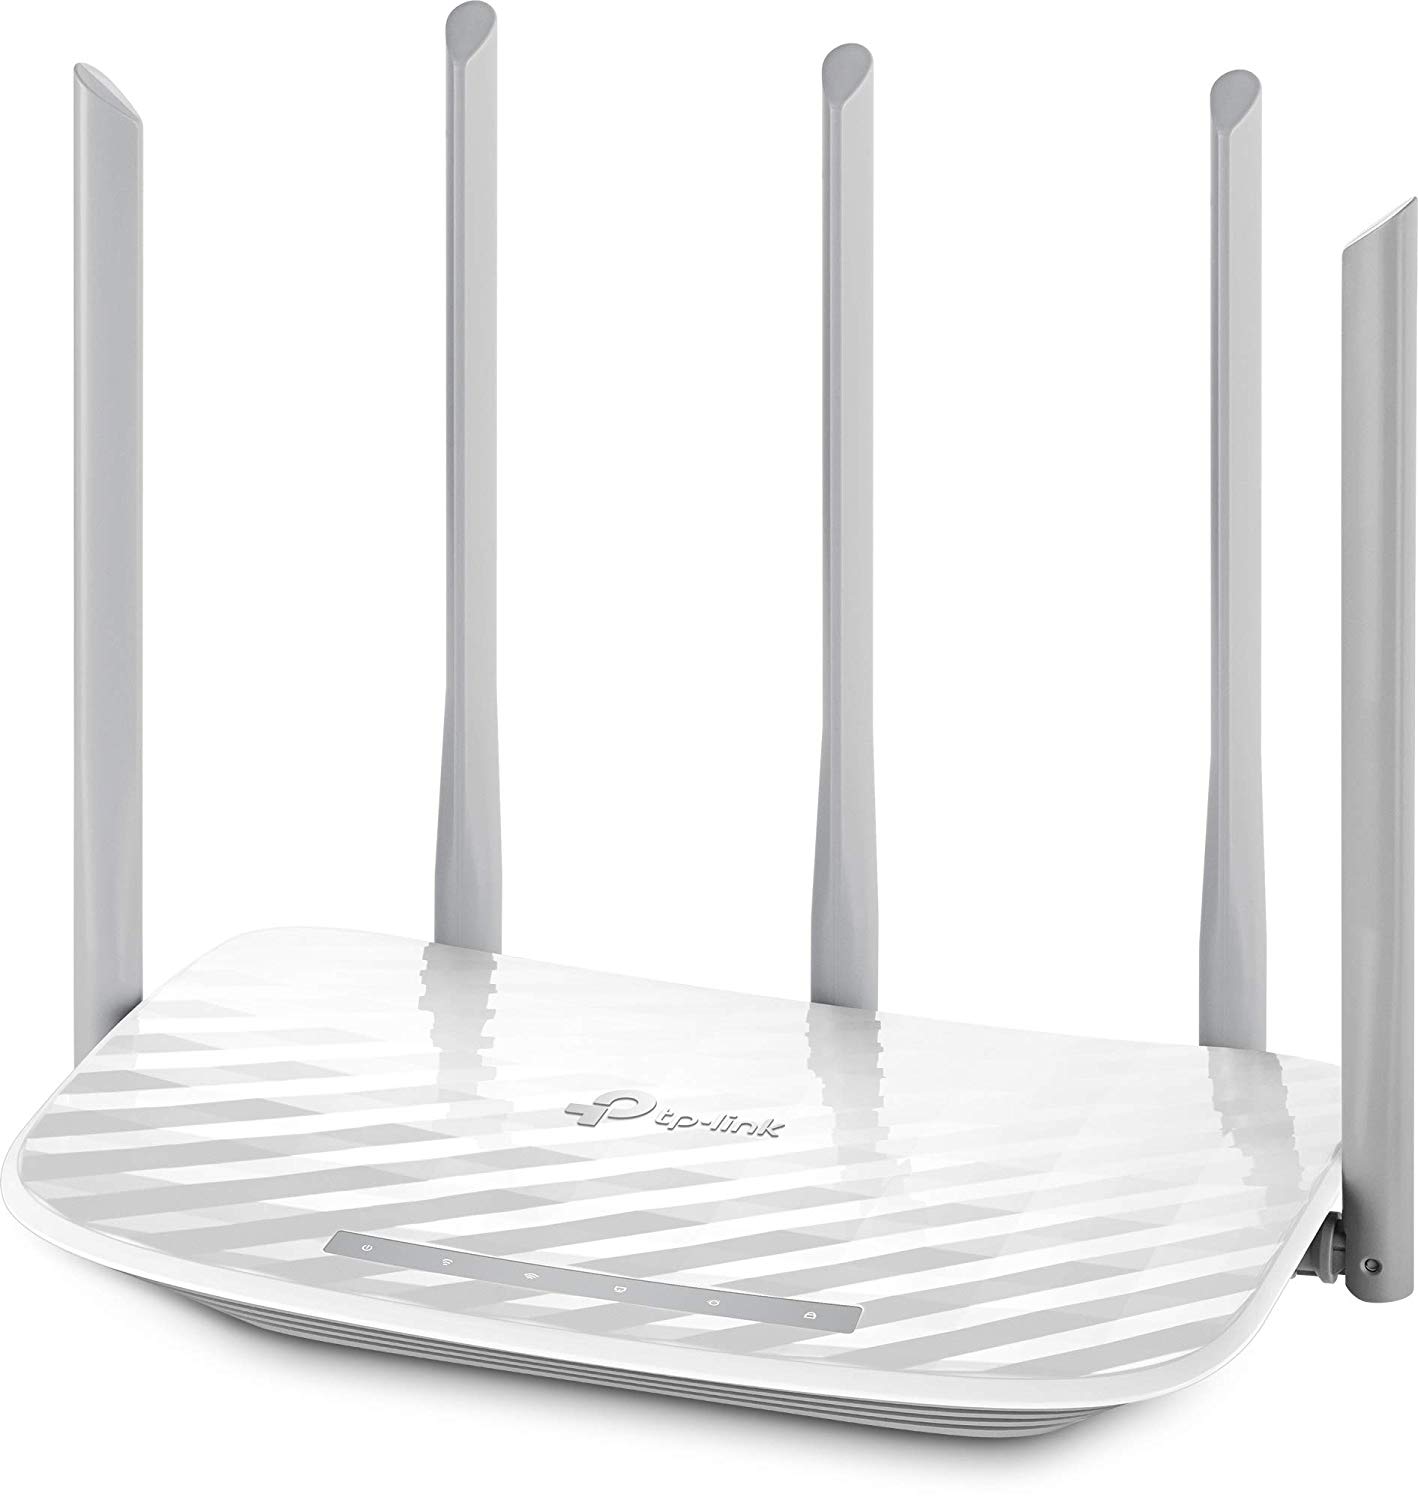 TP-Link Archer C60 AC1350 Wireless Dual-Band WLAN Router - White